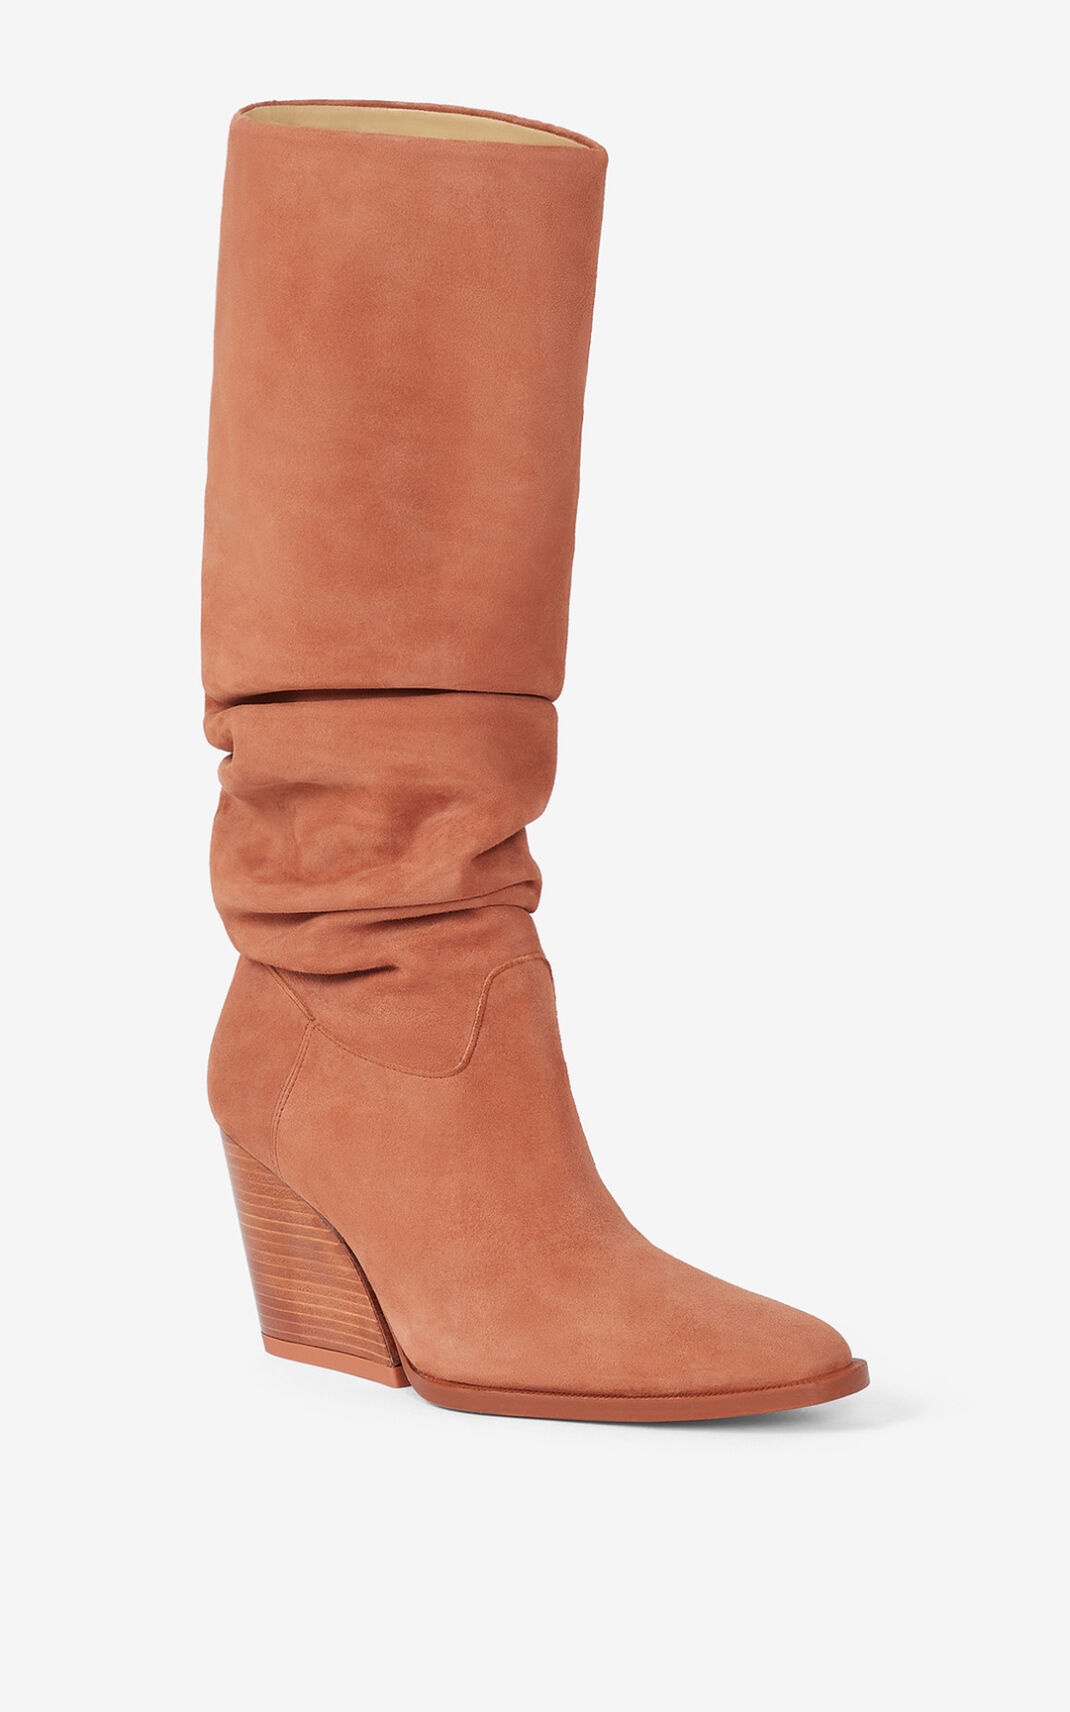 BILLOW heeled leather boots - 2